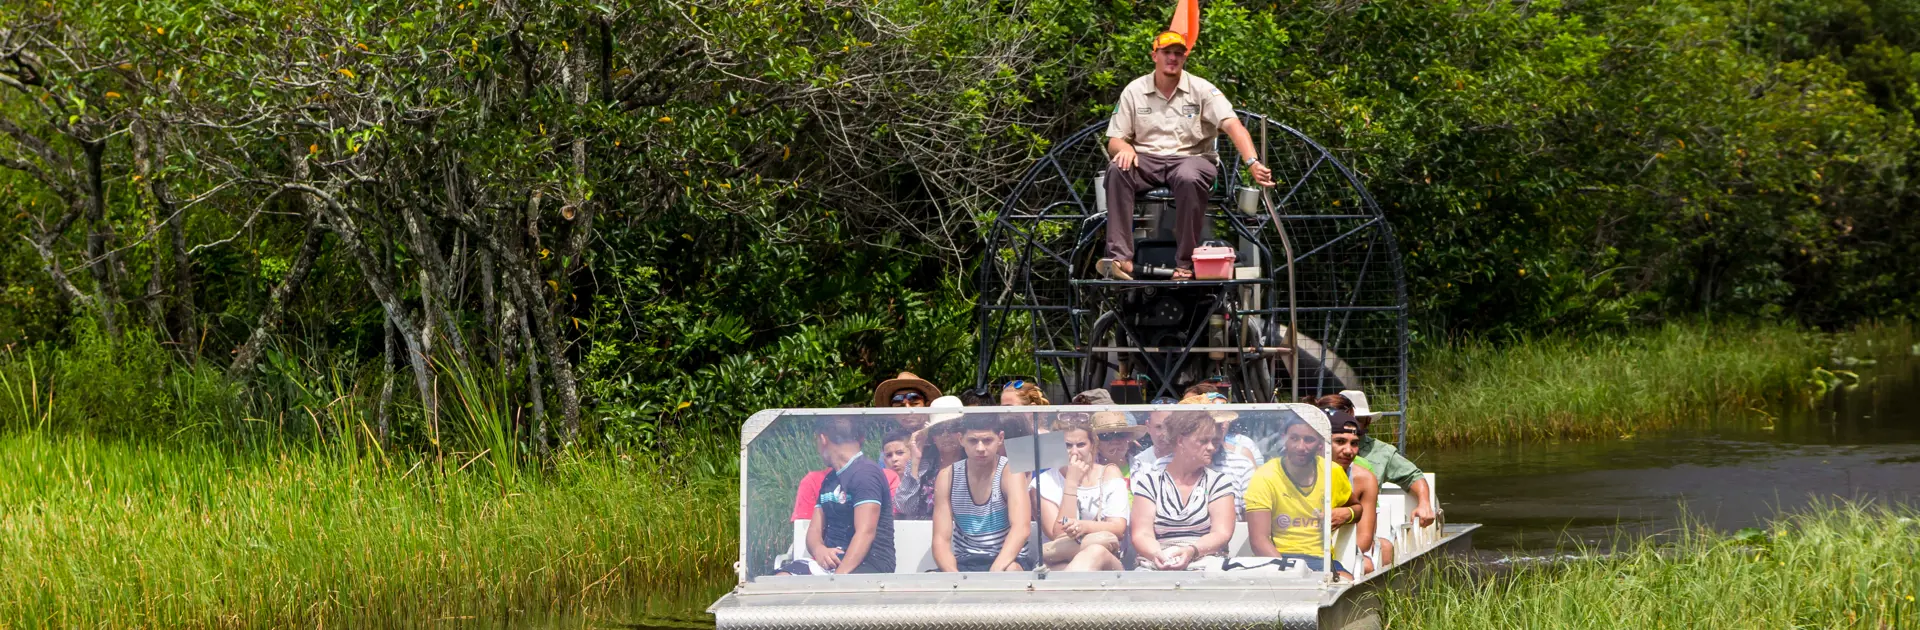 shutterstock_210652315 EVERGLADES, UNITED STATES - August 10, 2014 group of tourists riding an airboat..jpg